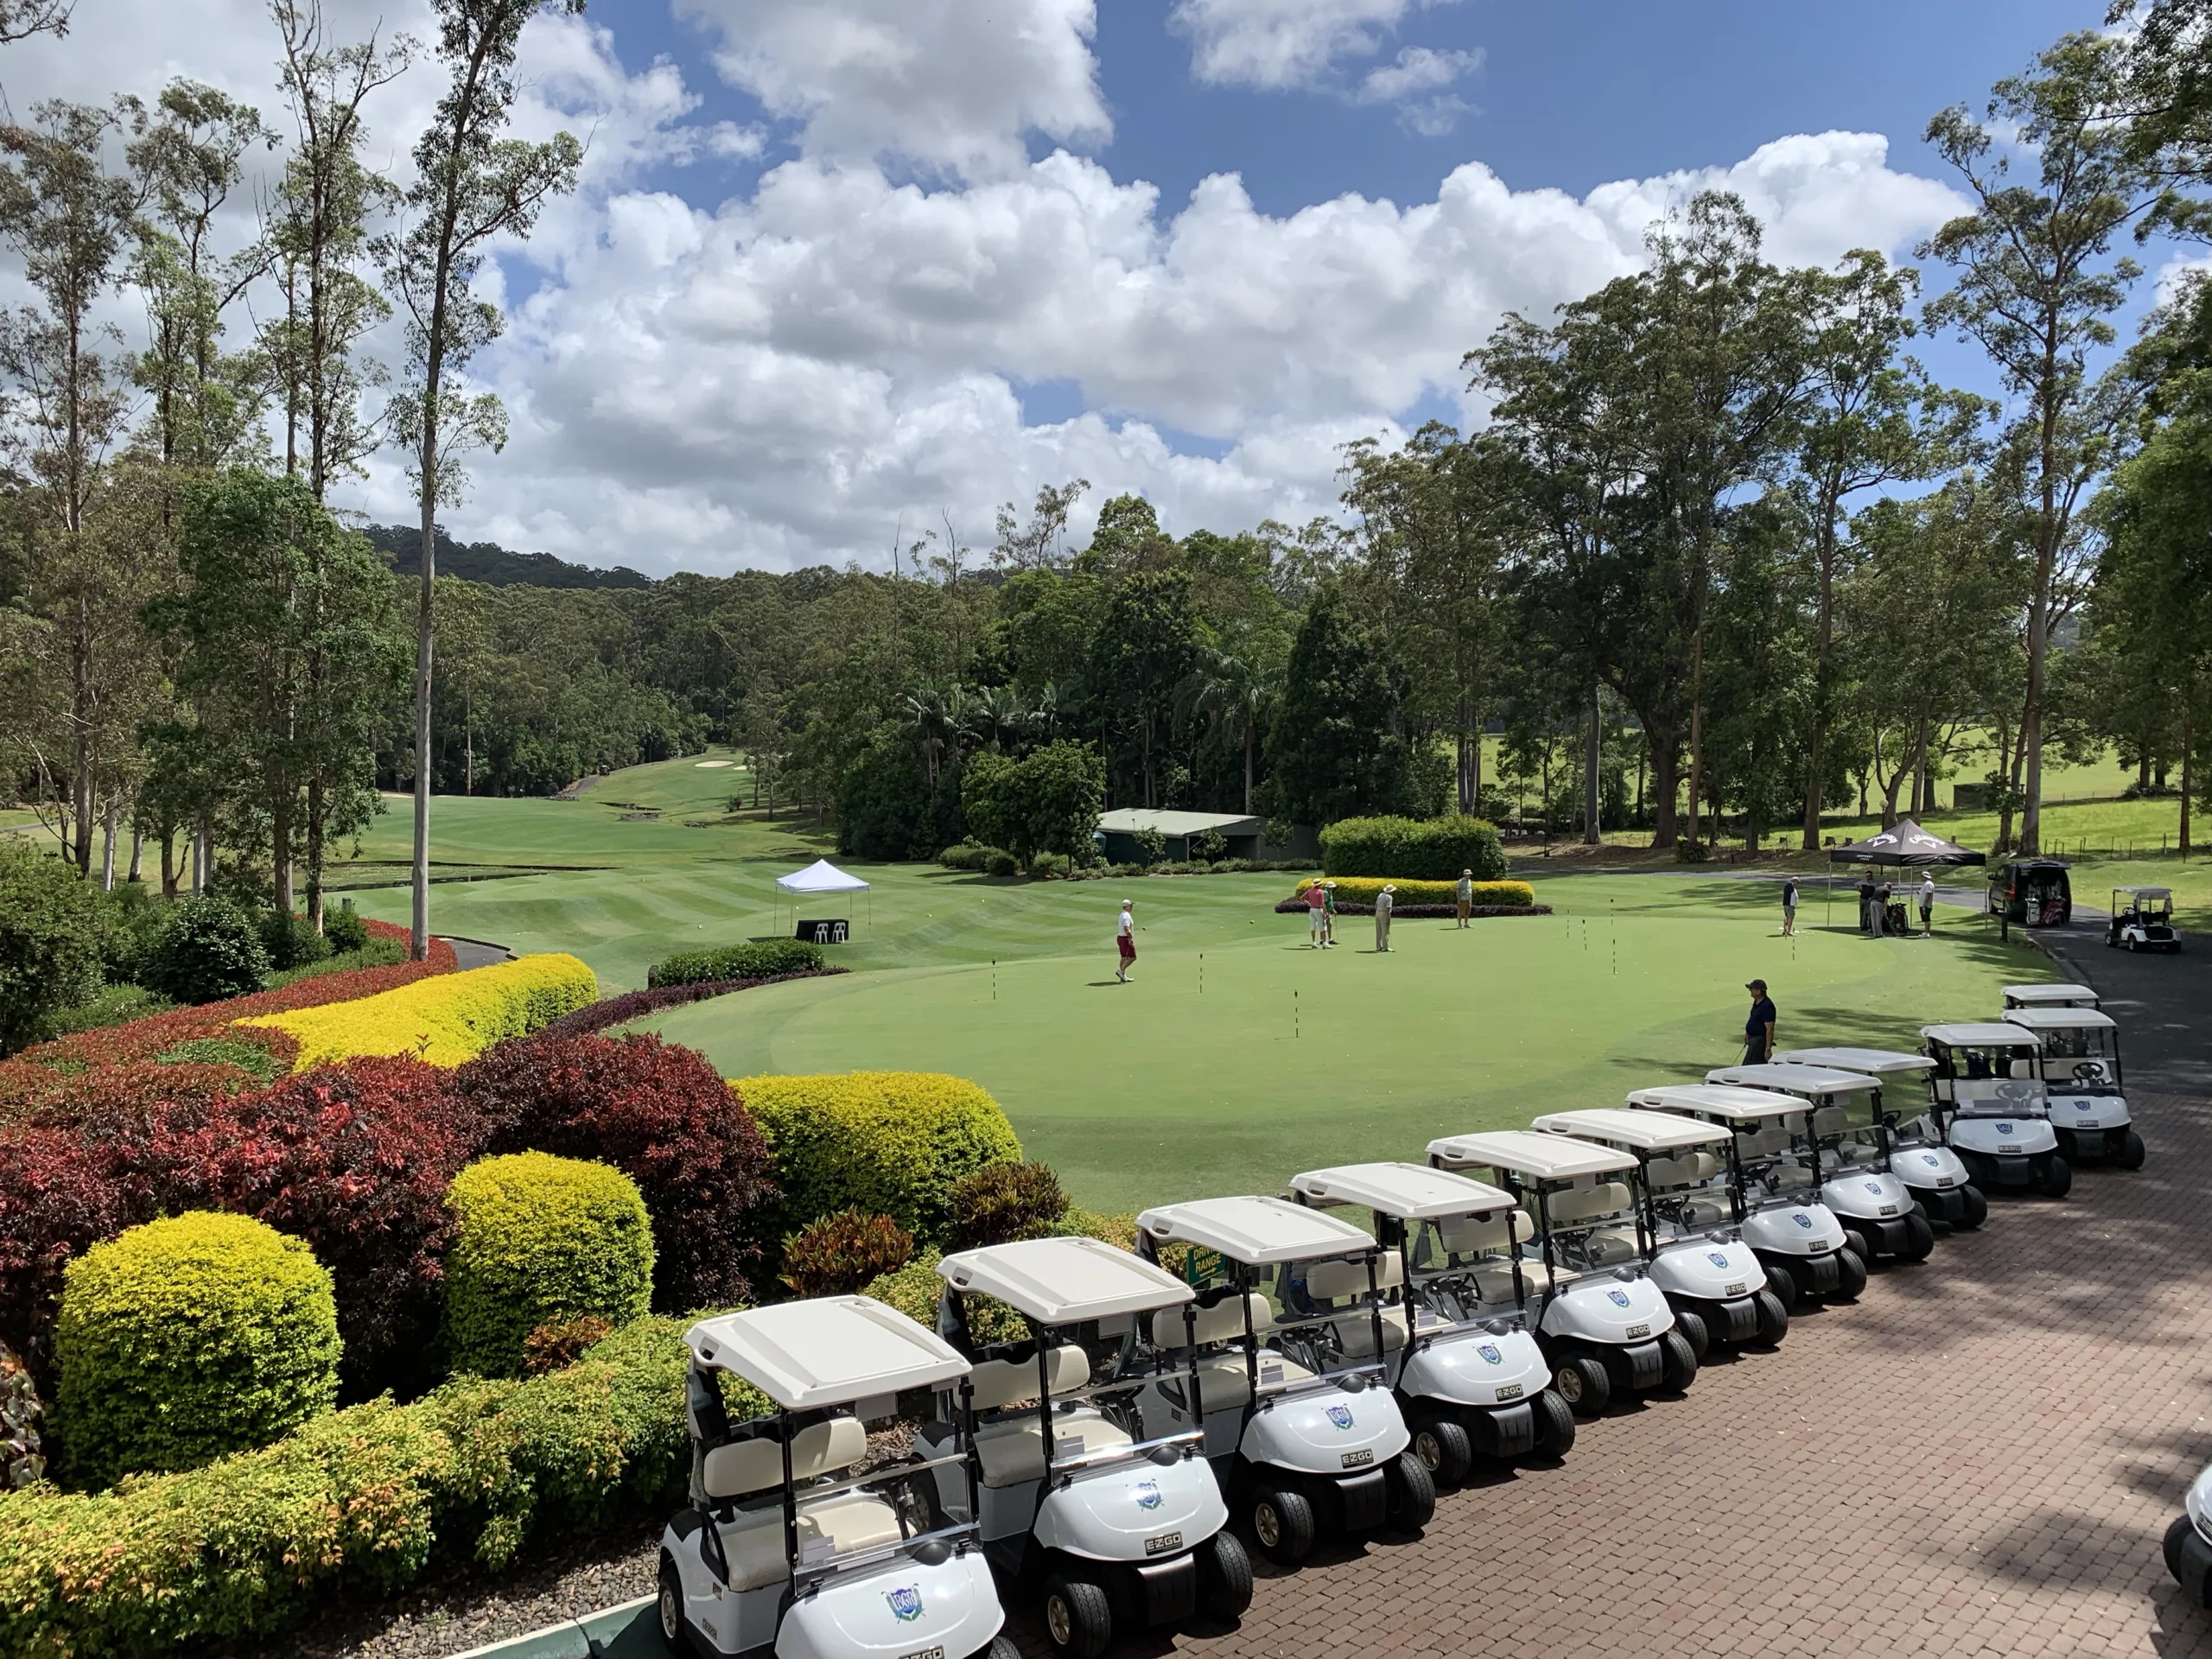 Bonville Golf Resort New South Wales Australia scaled